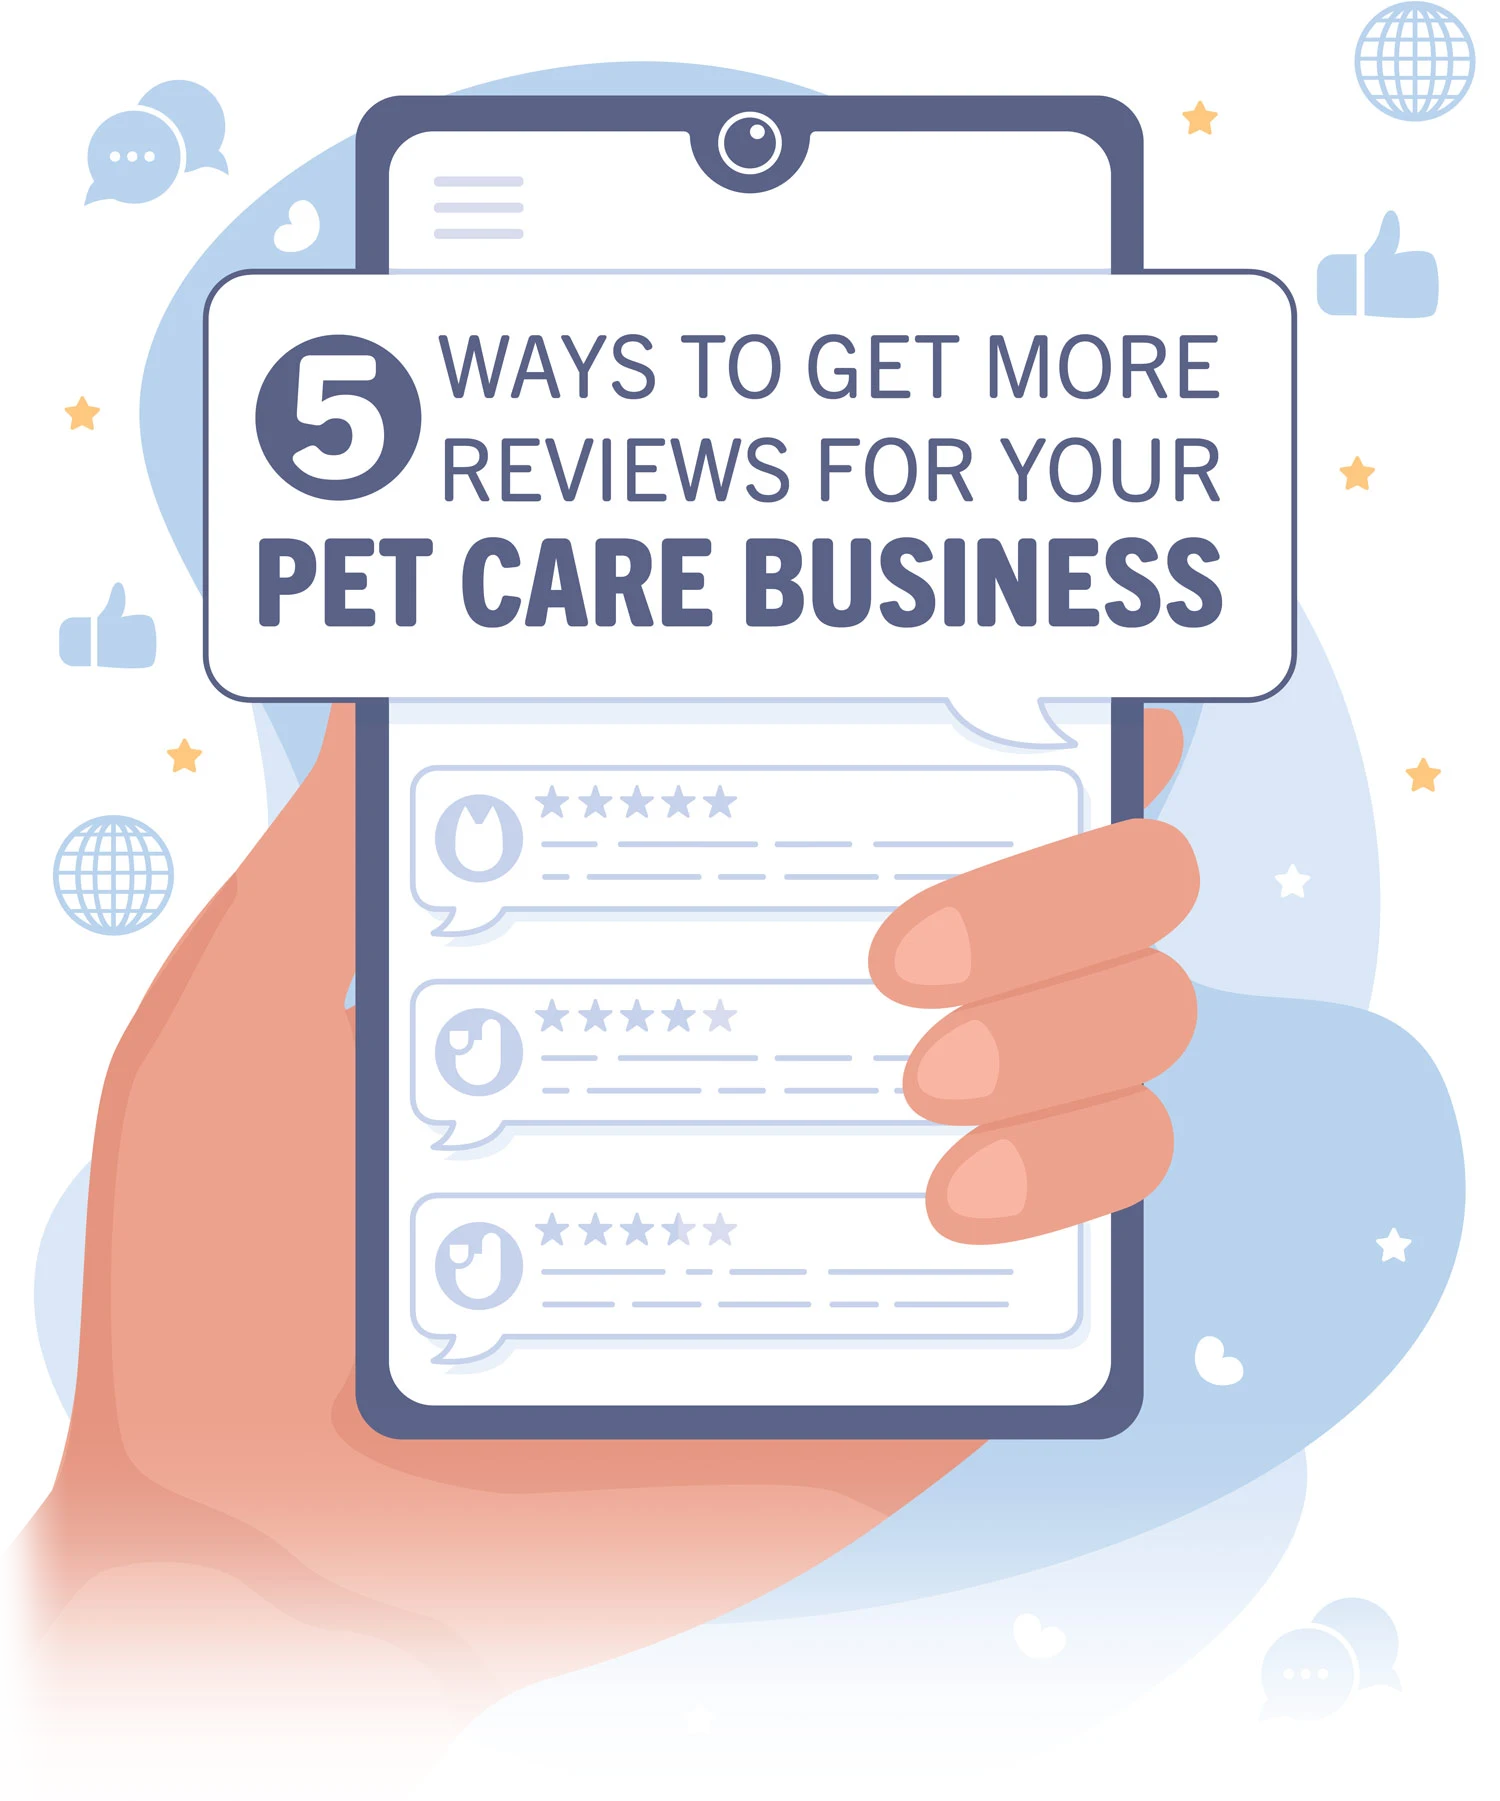 5 Ways To Get More Reviews For Your Pet Care Business